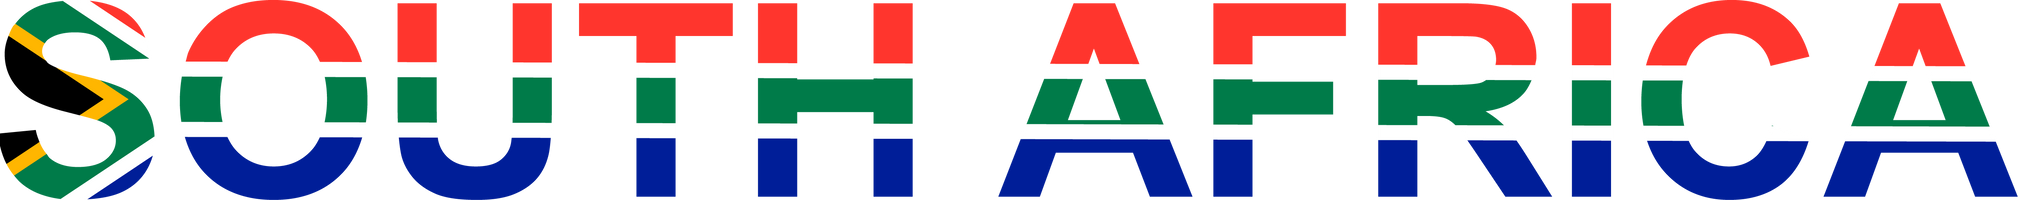 South Africa word in flag style